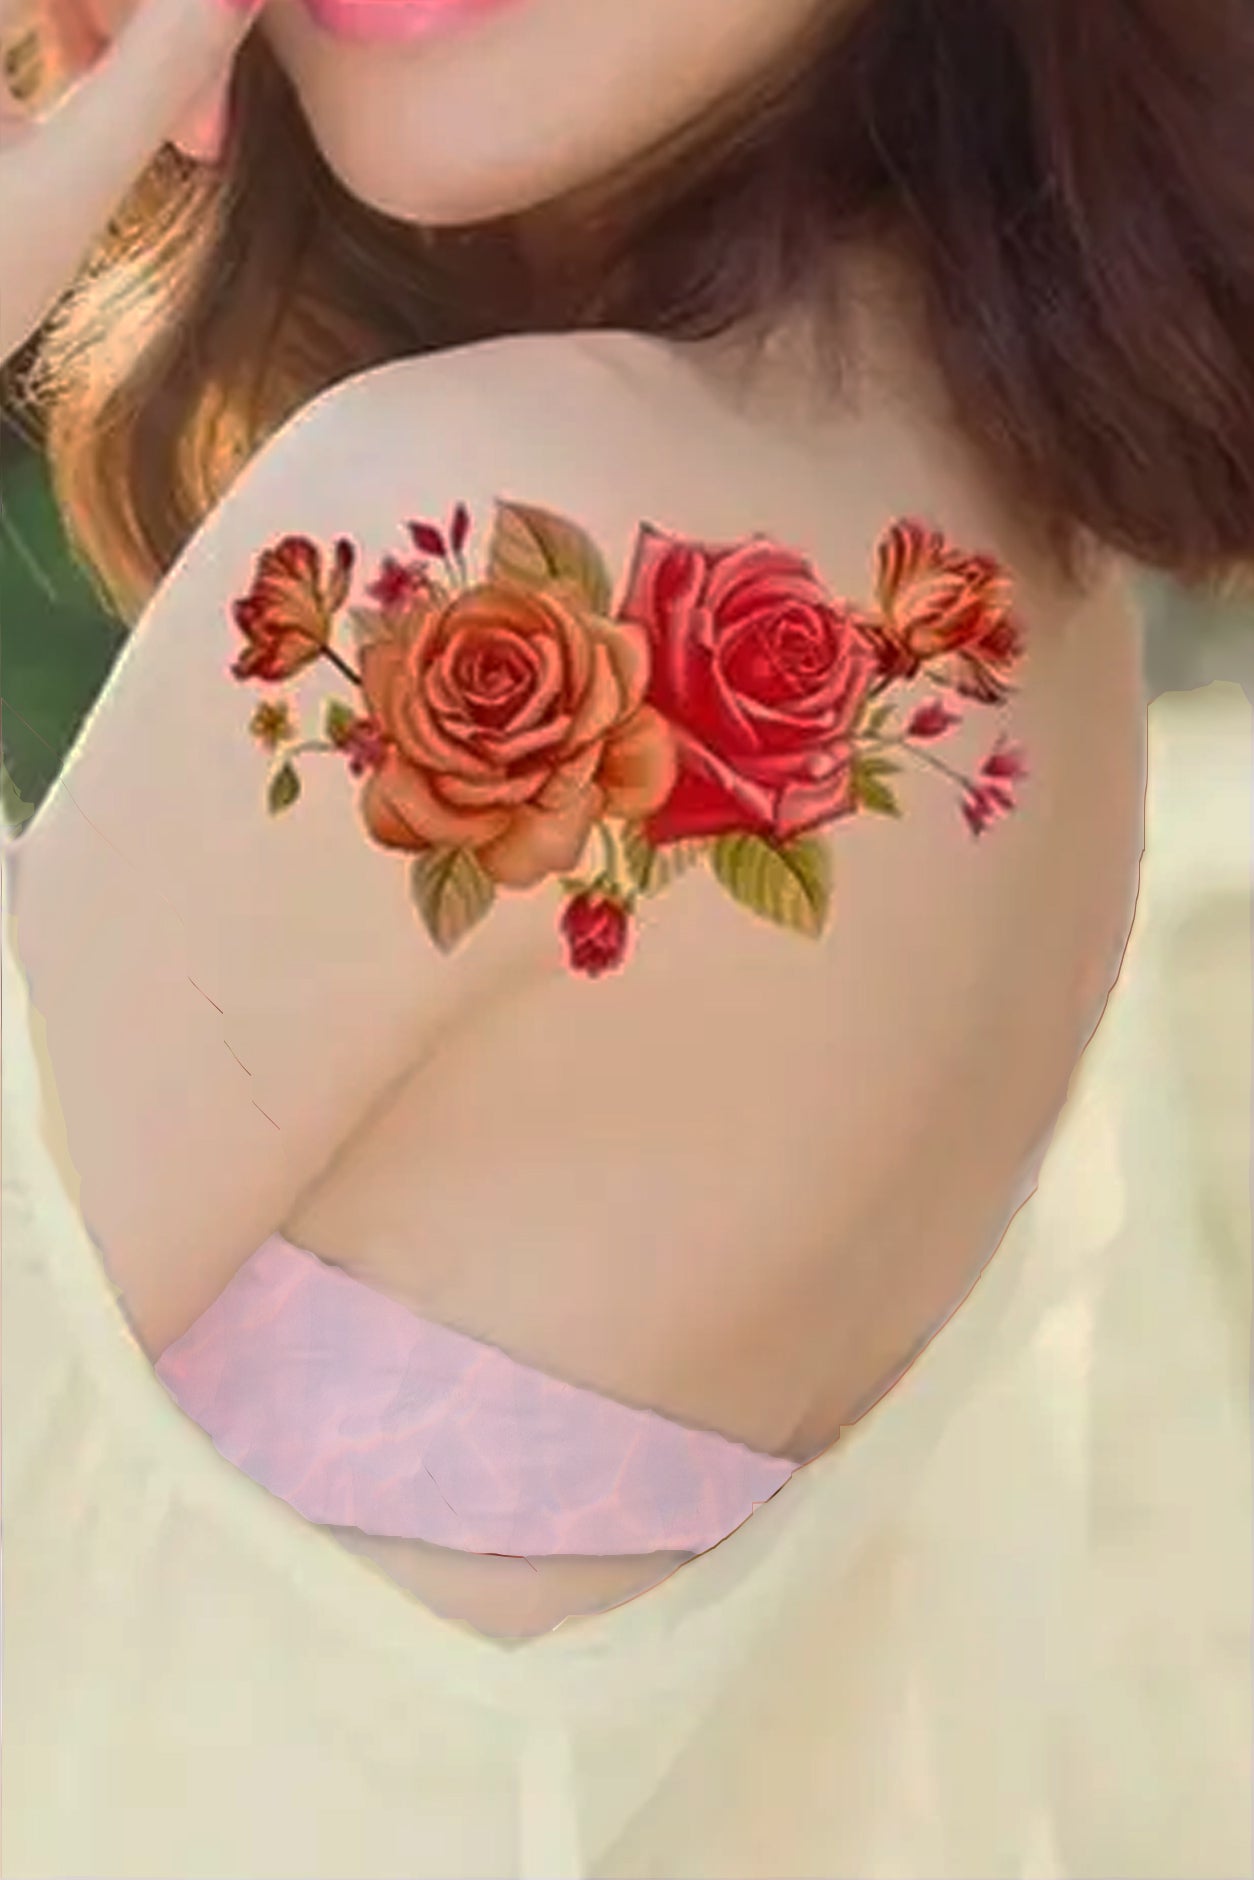 A girl displays the rose bouquet on her shoulder. A delicate bouquet of lifelike pink and deep pink roses will beautify your arm, leg, torso, hip, or chest. The delicate rose capture light and shadow just right, the spray has tiny buds and leaves in the background at the right juxtaposition.